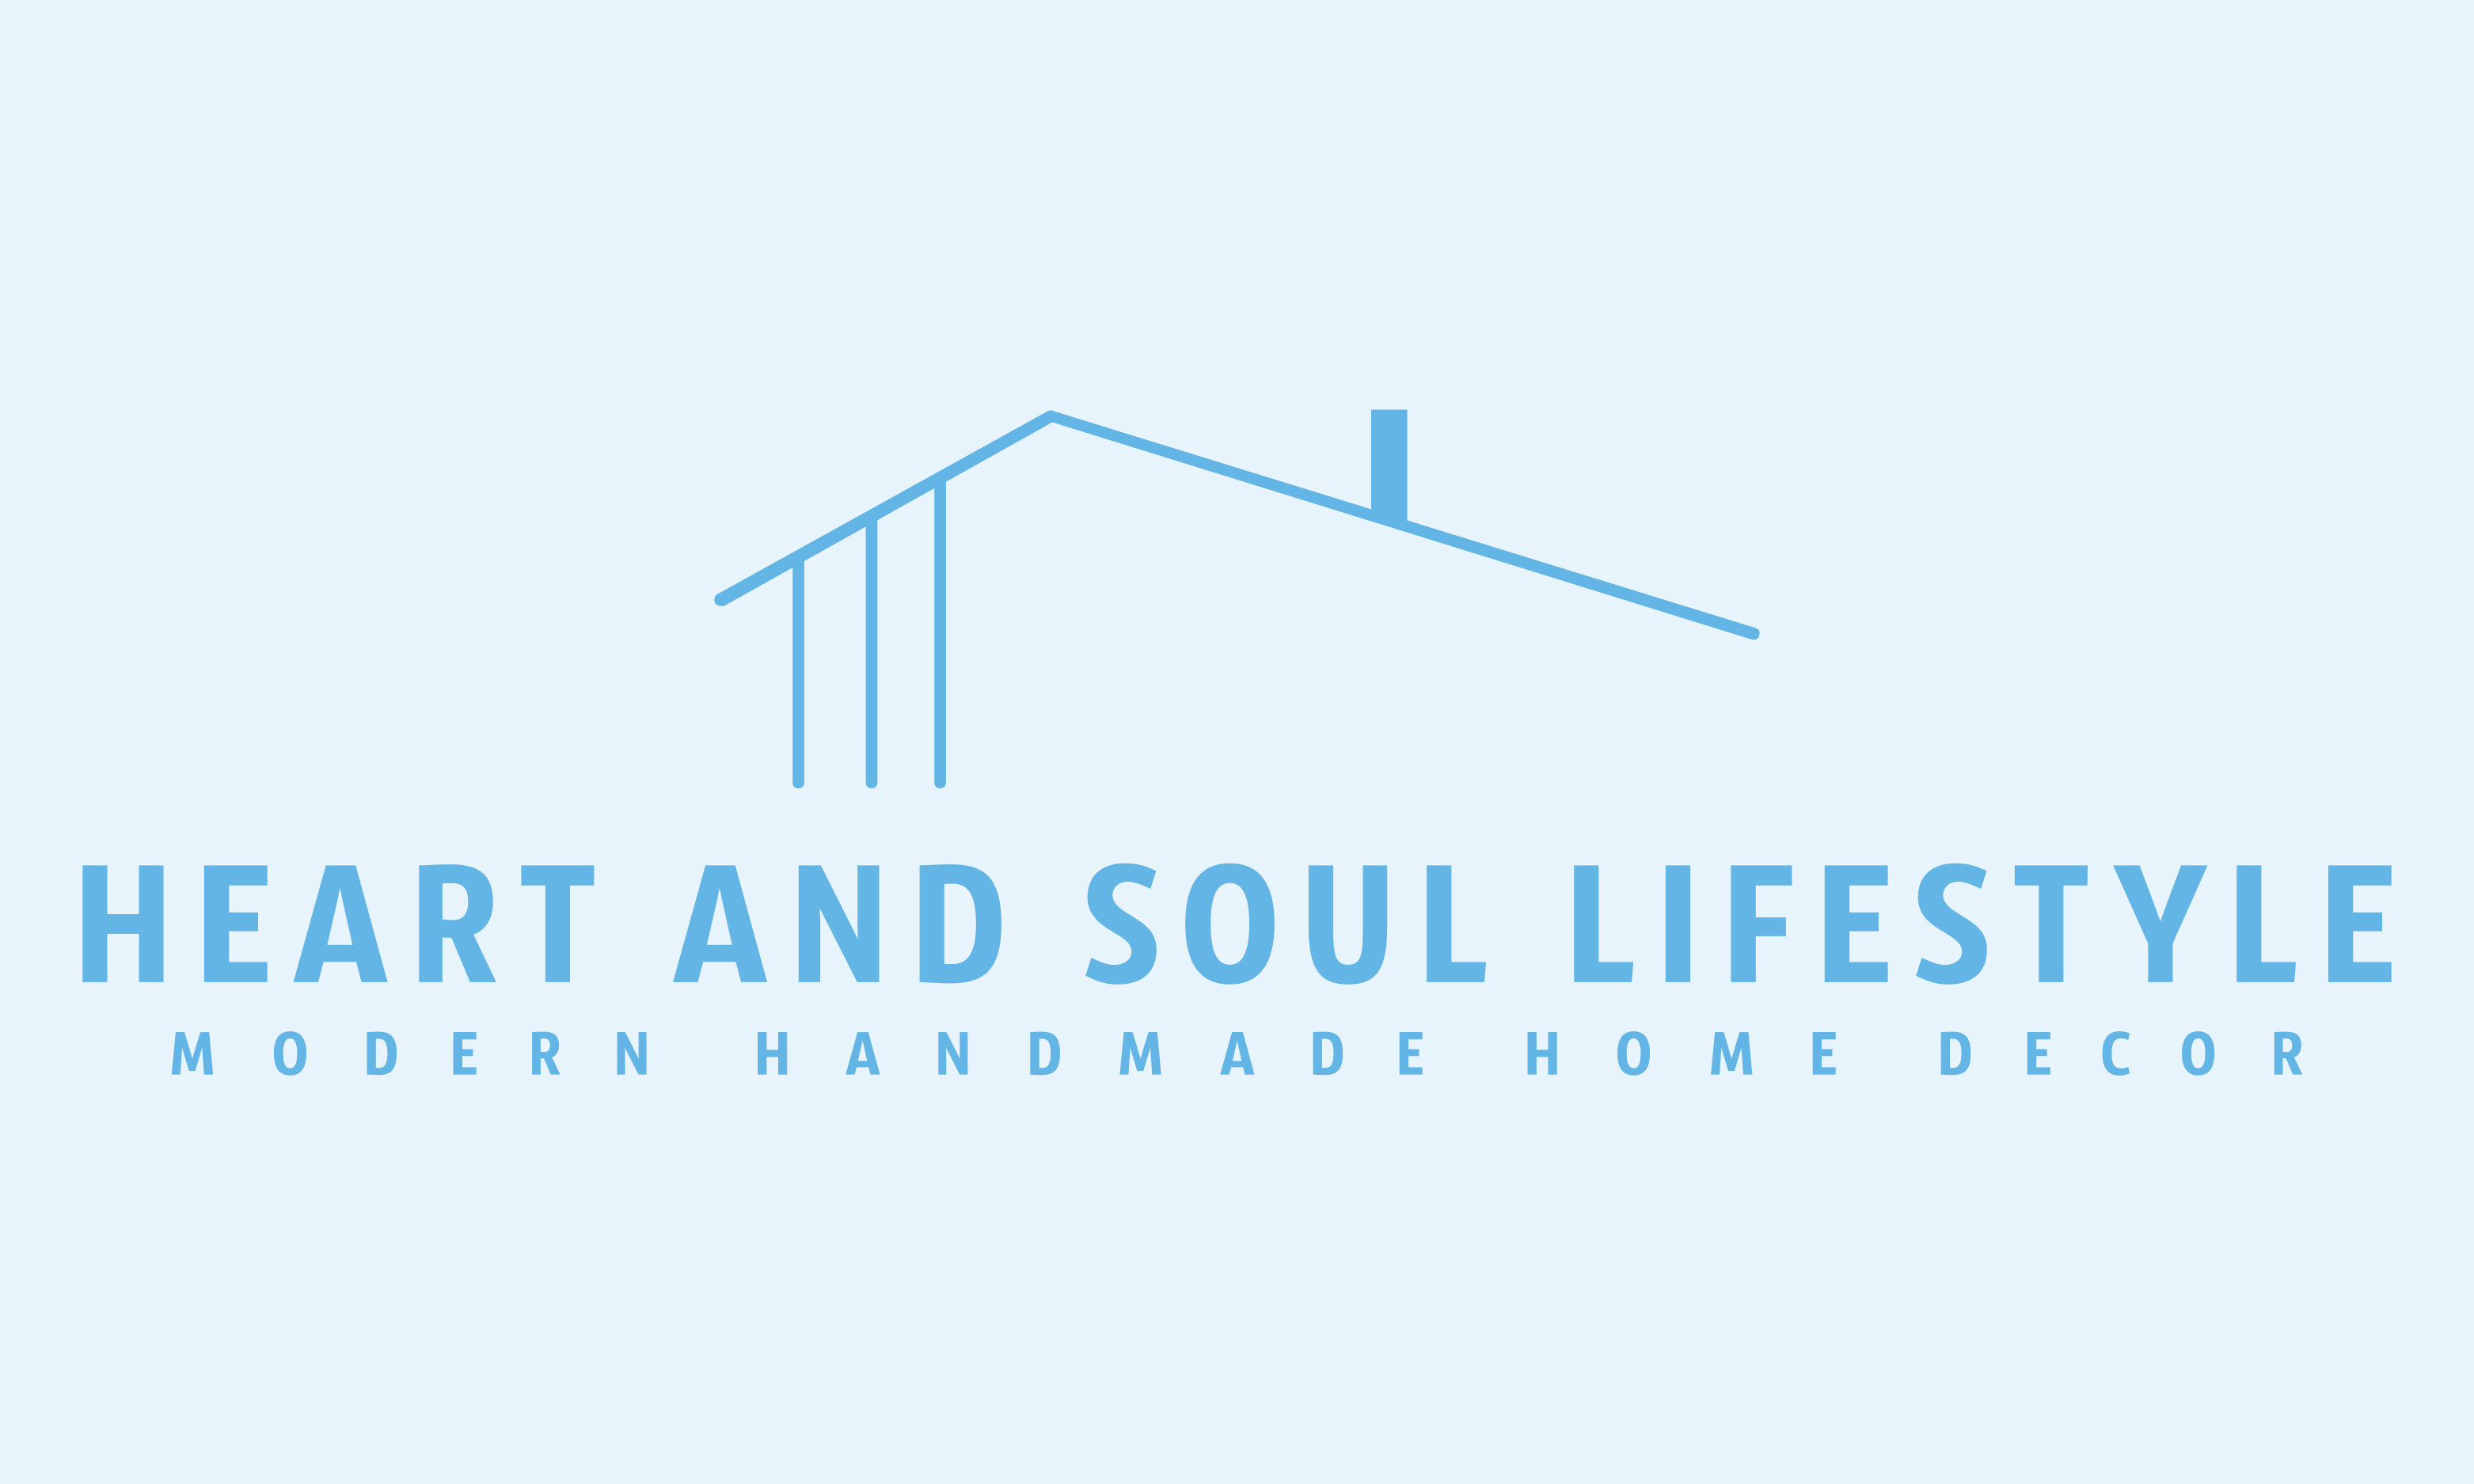 Heart and Soul Lifestyle: Bringing Bespoke Modern Furnishings to One’s Home